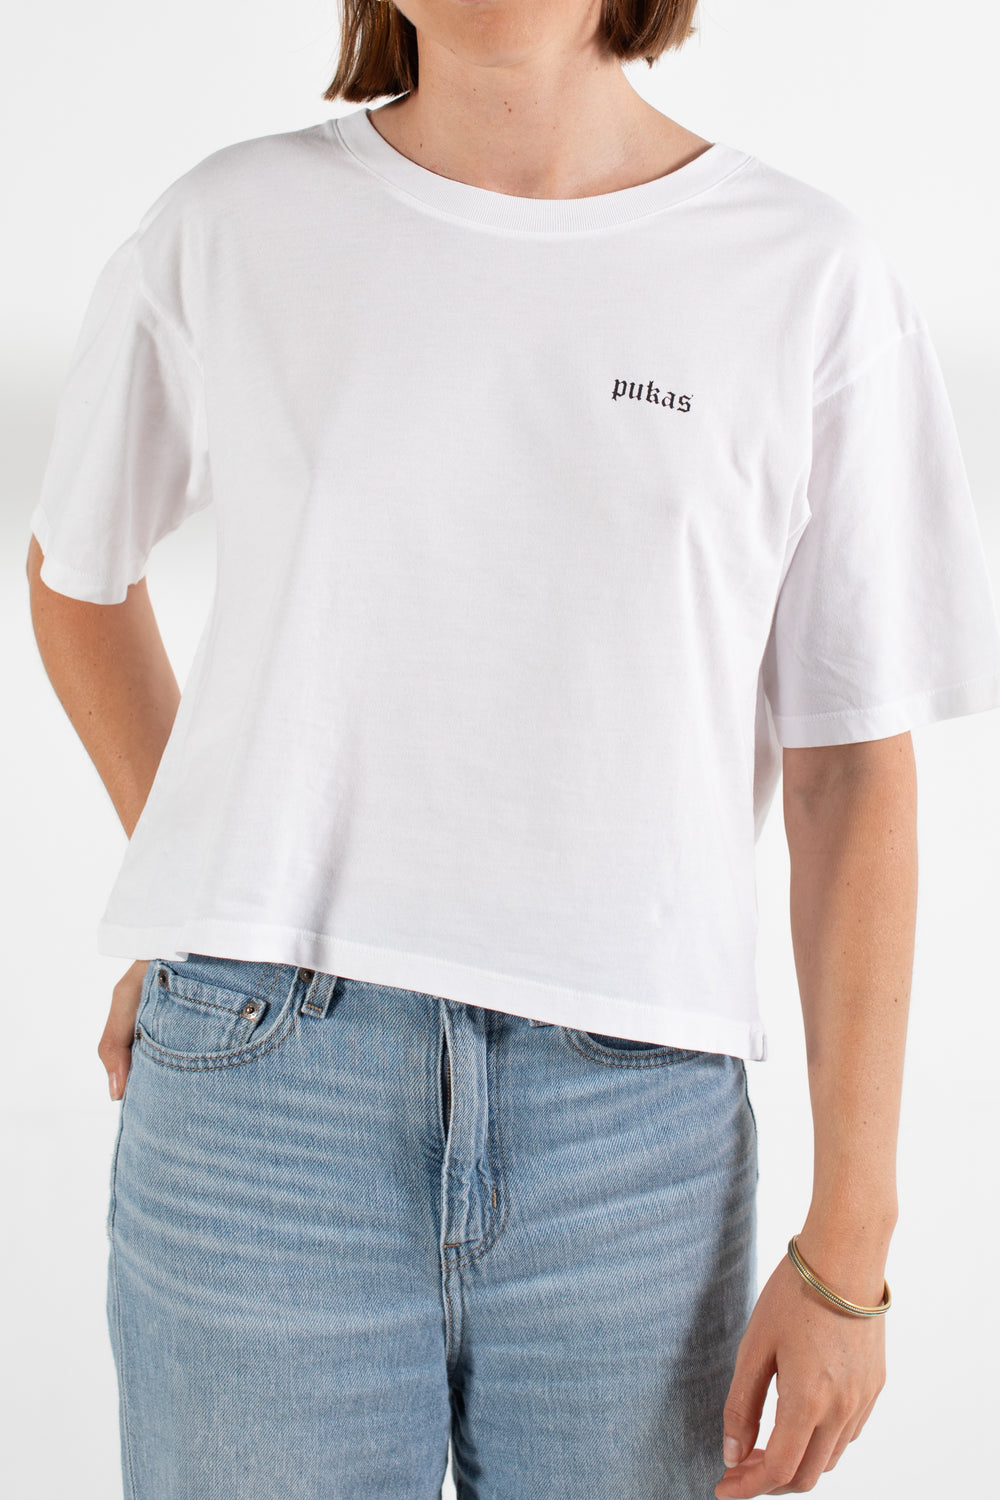 Pukas-Surf-Shop-Surfing-The-Basque-Country-tee-woman-More-Surfing-white